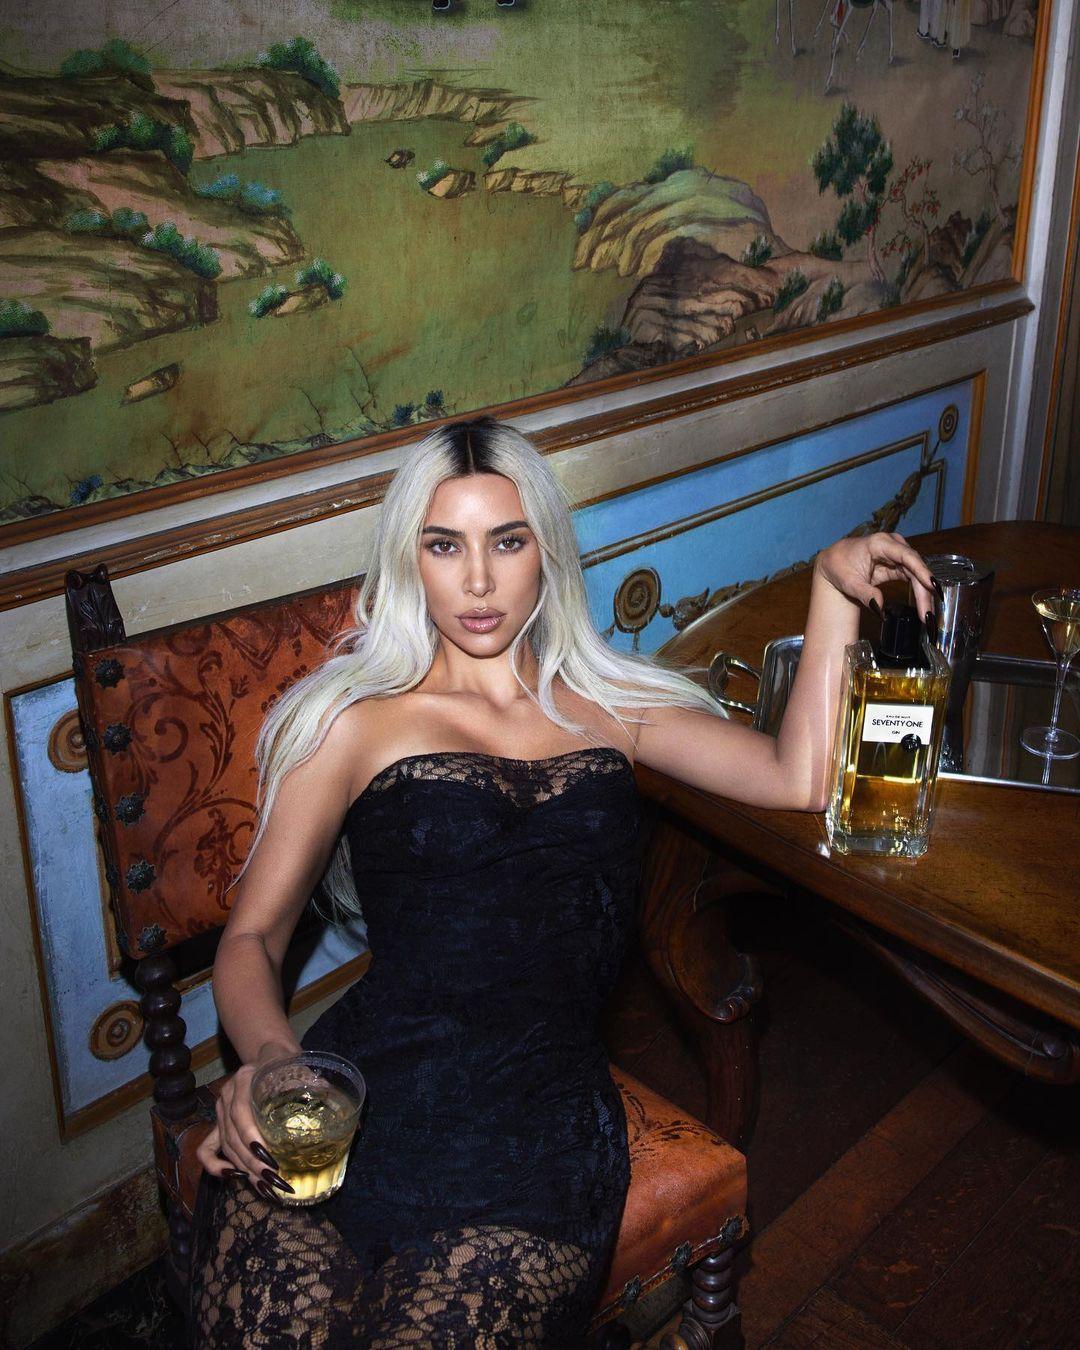 Kim Kardashian features in an alcohol ad